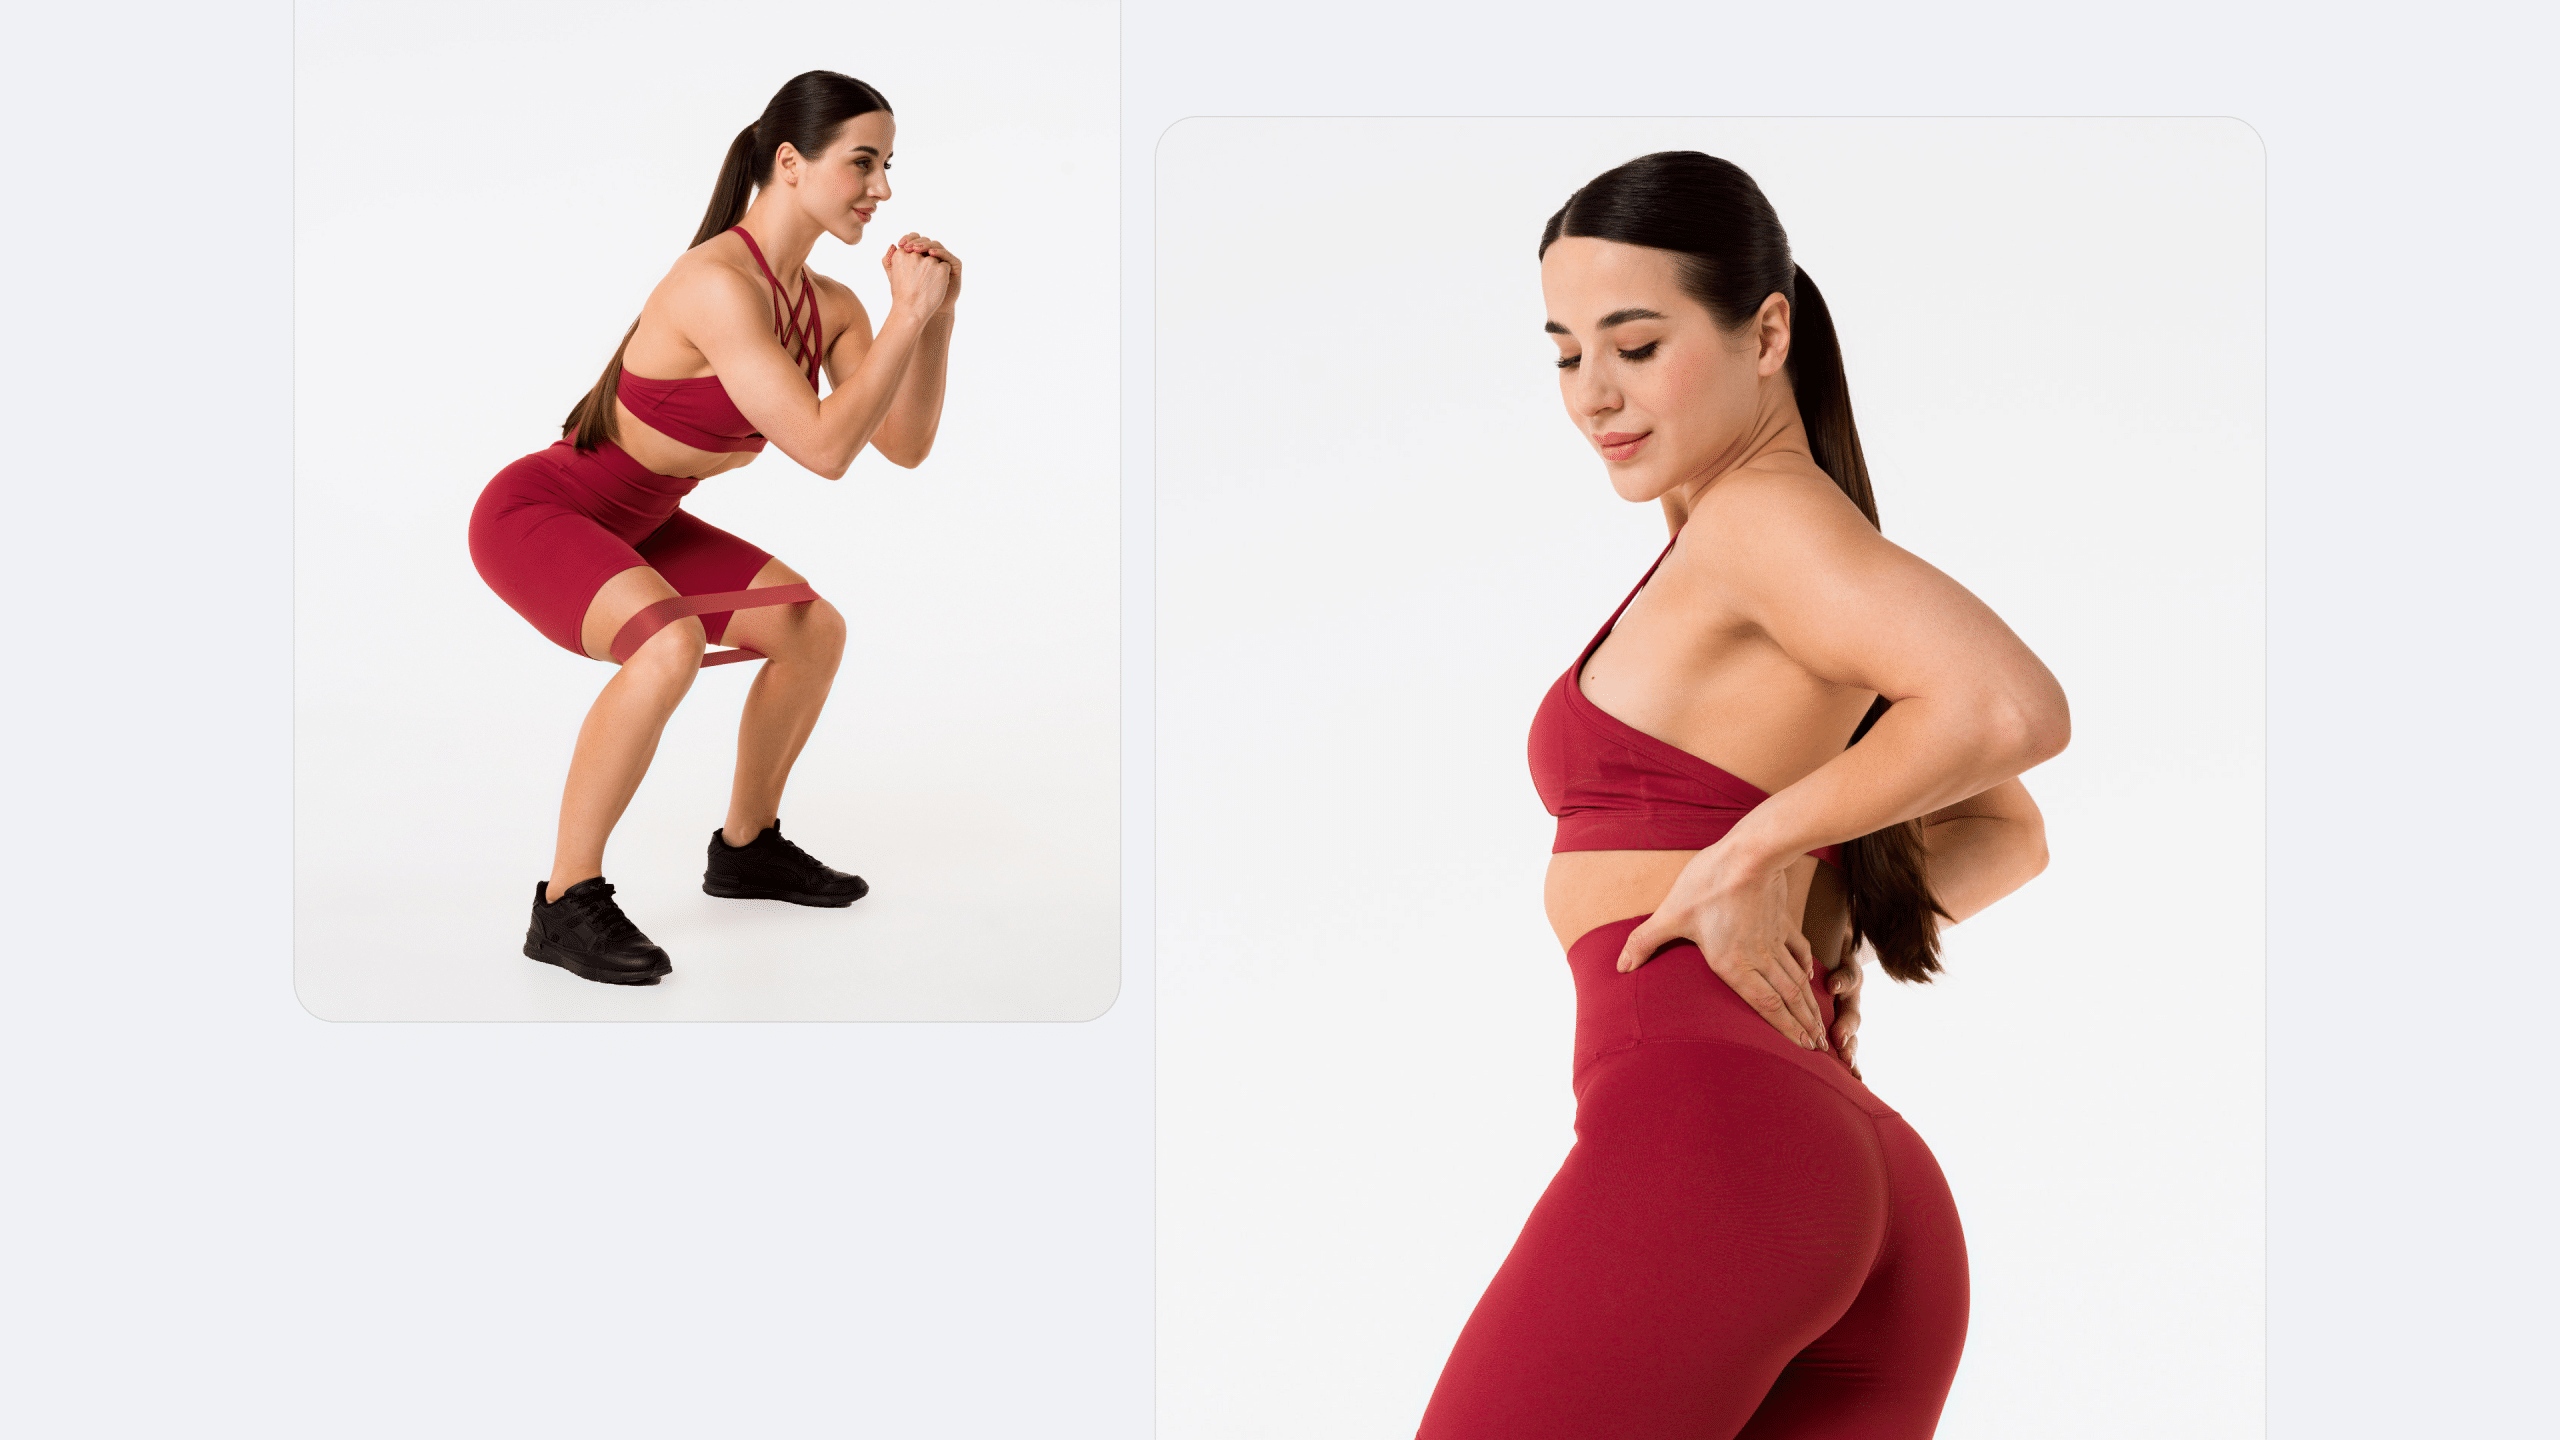 Resistance Band Butt Workout: 13 Effective Moves To Build Muscle - BetterMe